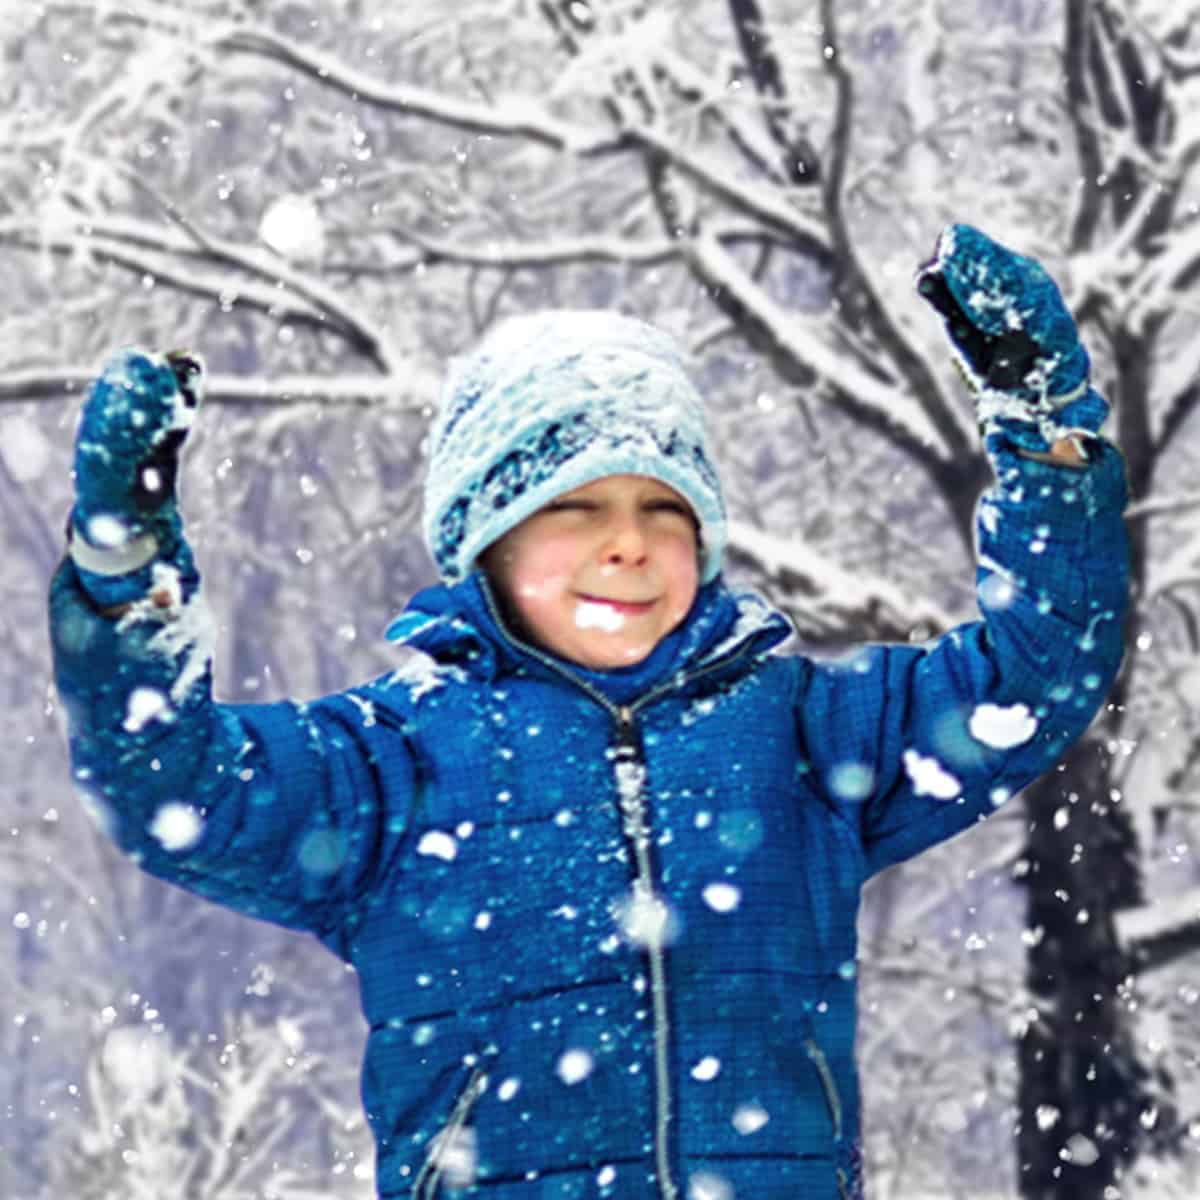 Here are 10 sensory activities for you to include in your treatment sessions and share with parents during the winter months. Learn why sensory activities and “heavy work” are important for all kids, and how to include the proprioceptive system during play.